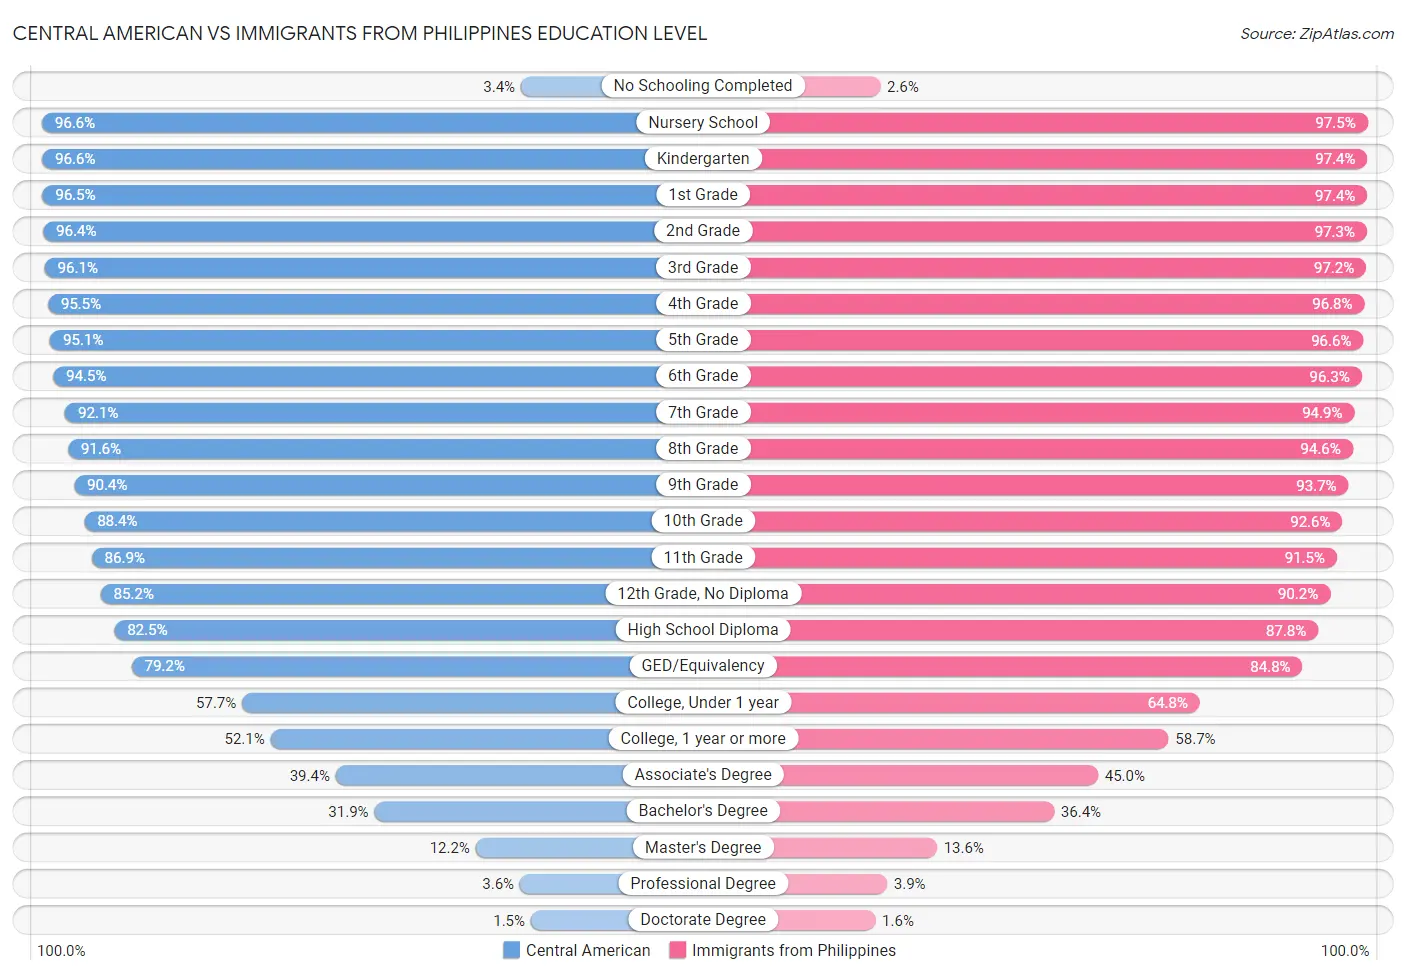 Central American vs Immigrants from Philippines Education Level